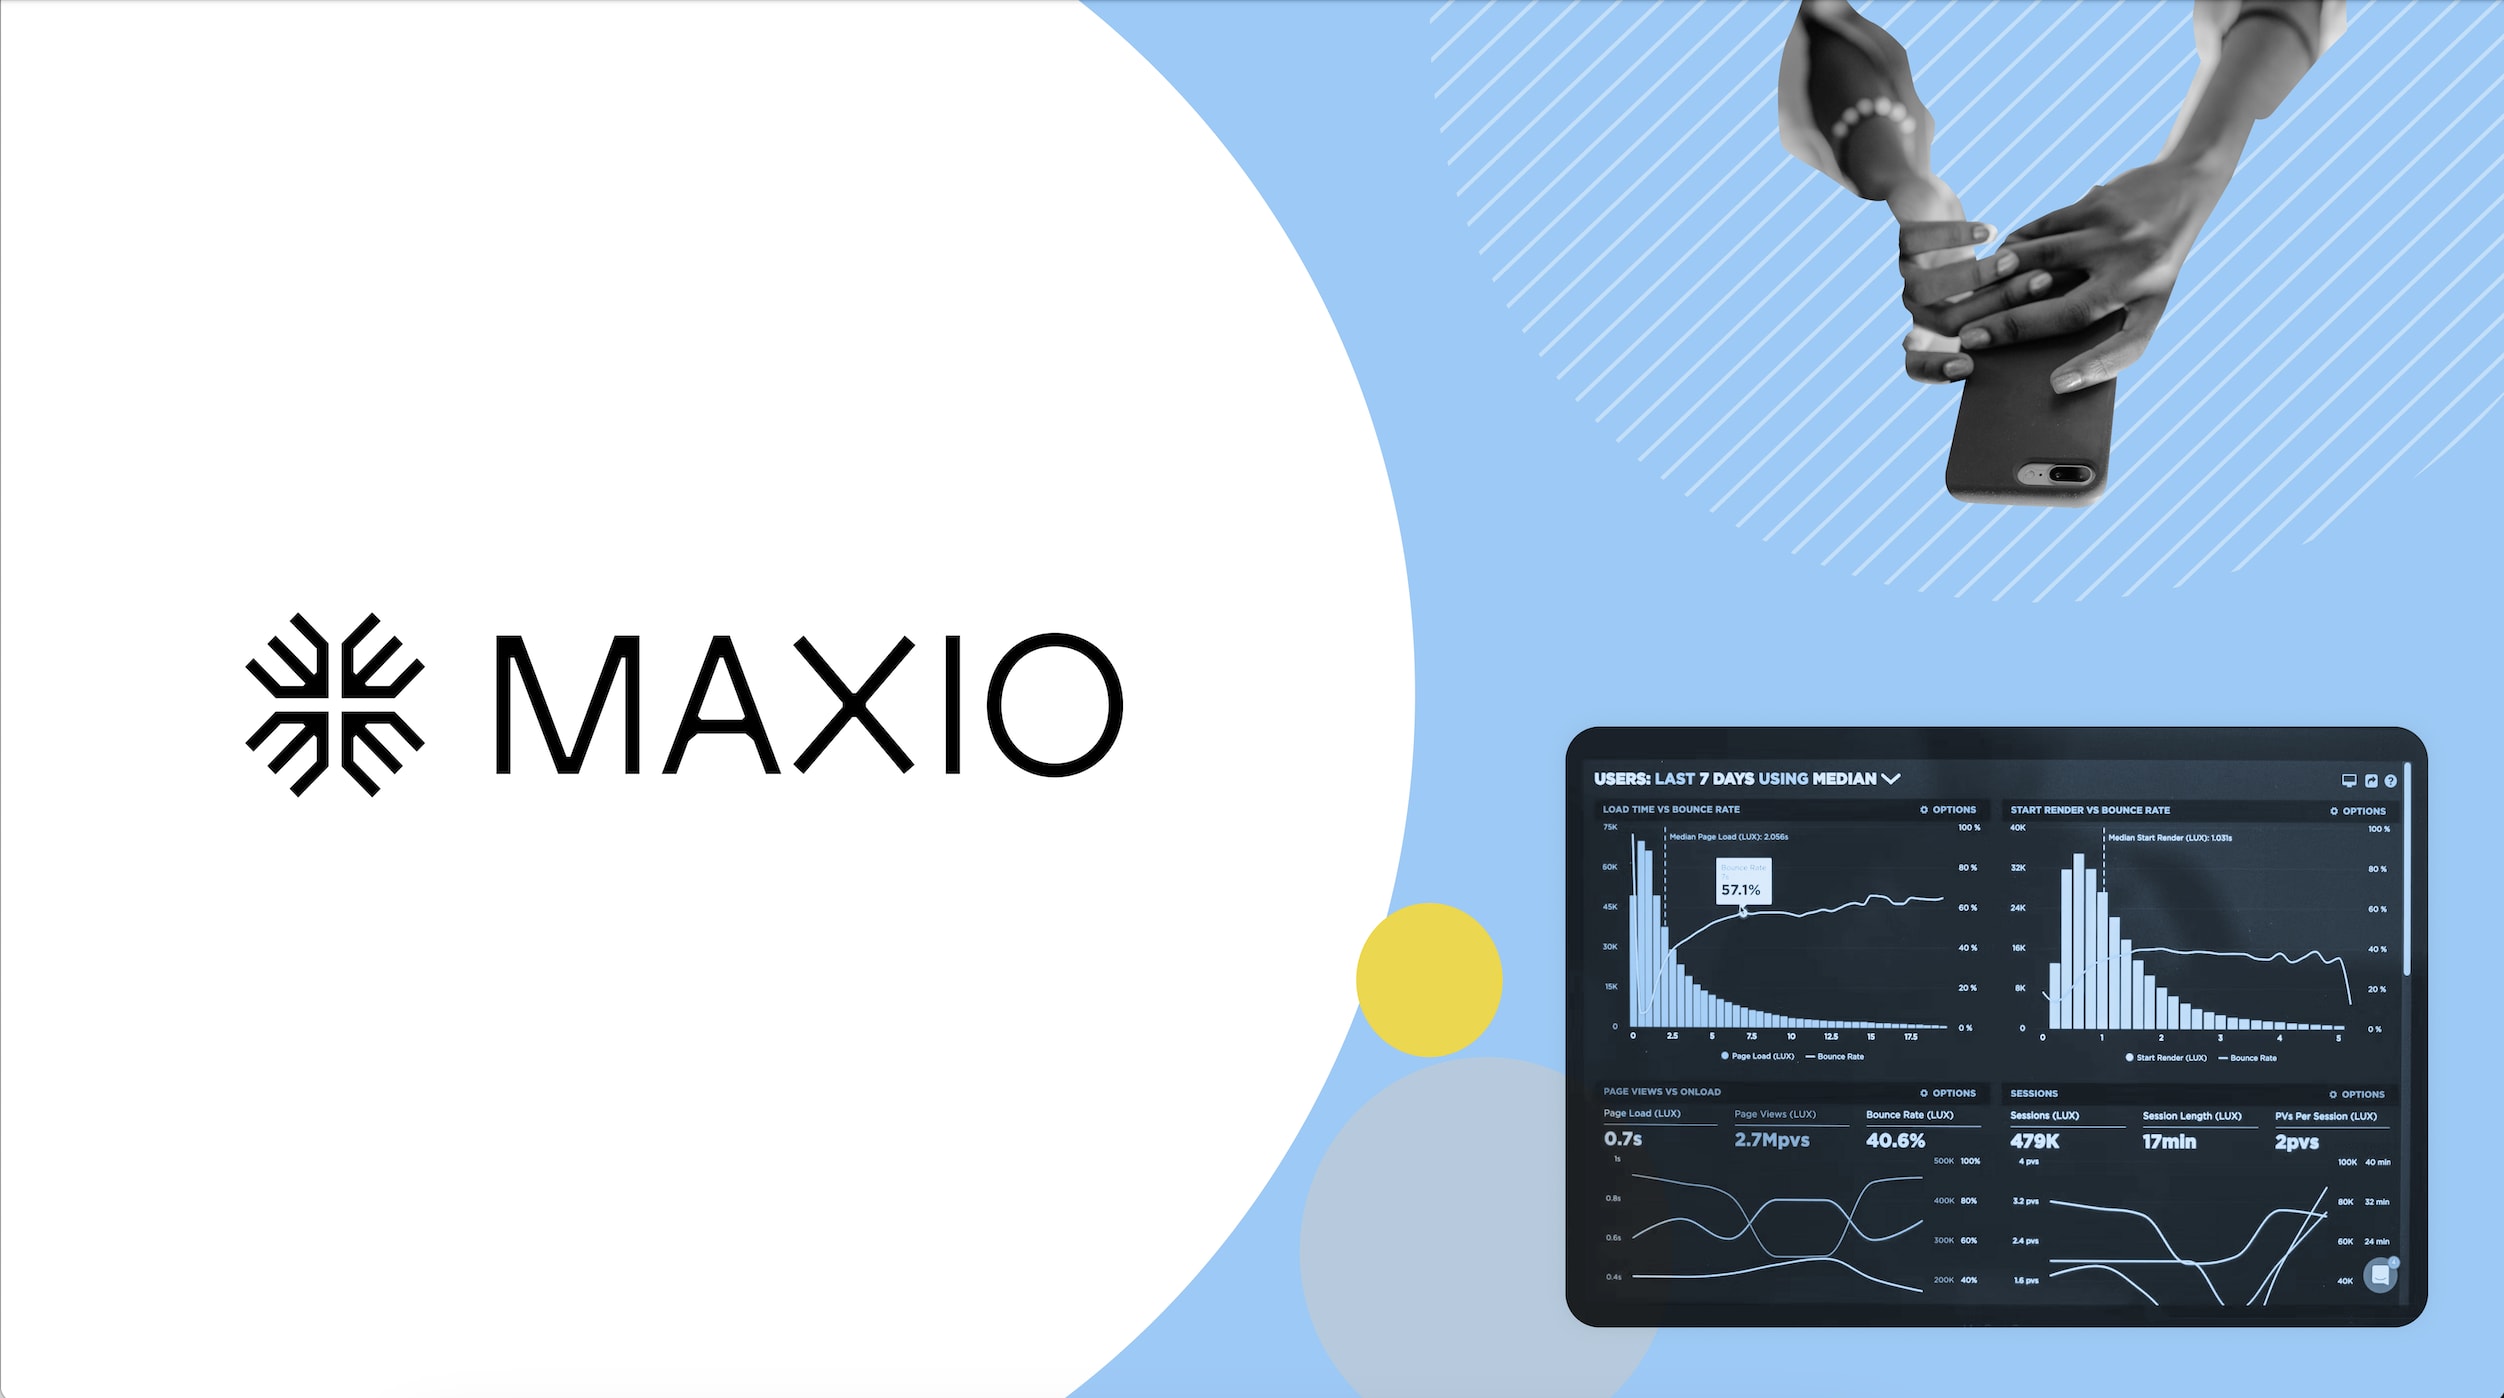 Introducing MAXIO: Our New Client and Their Financial Operations Platform